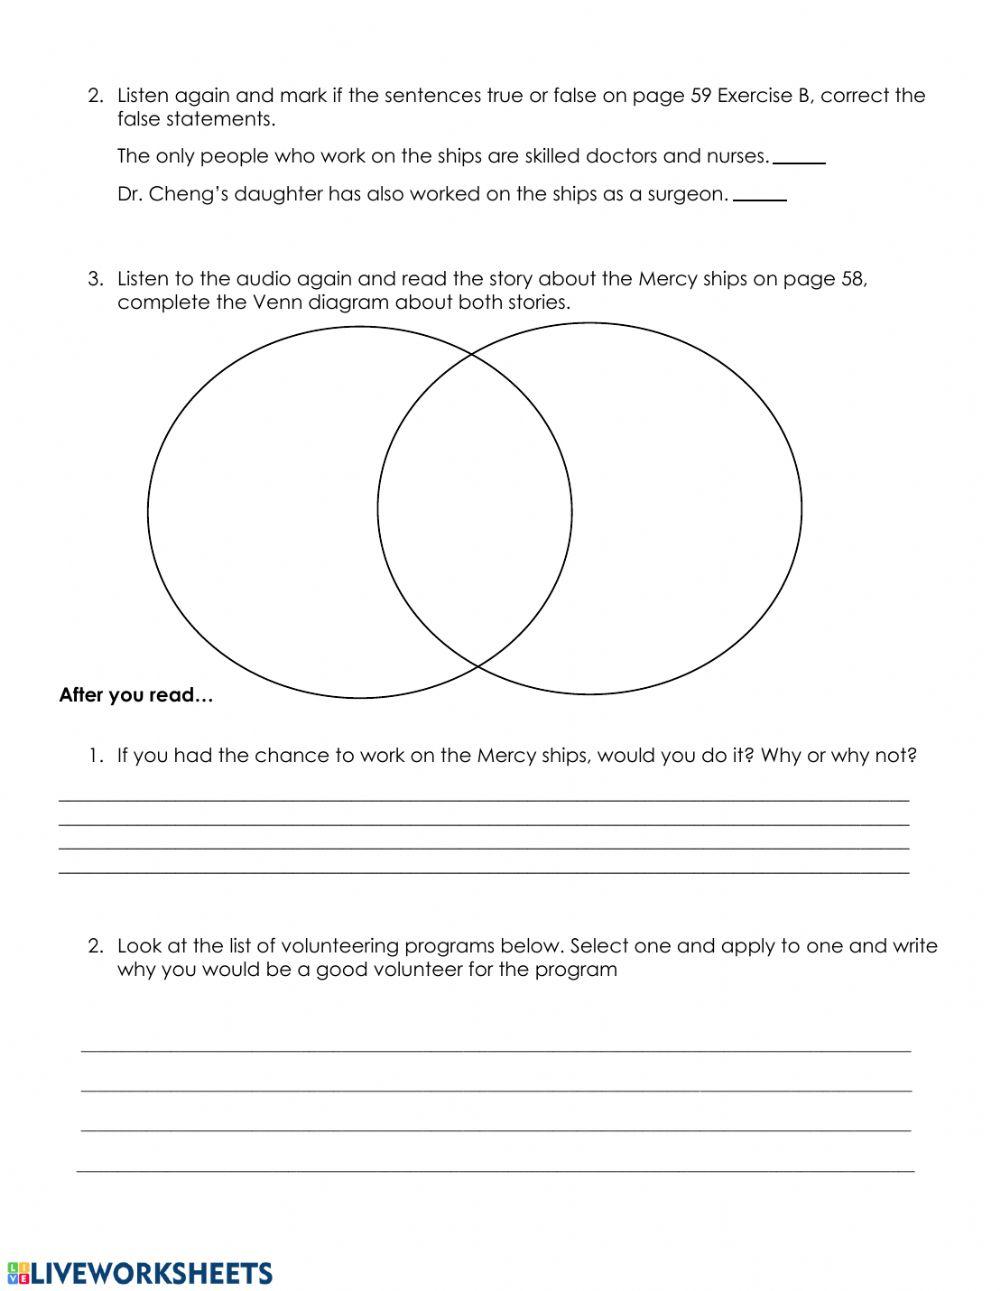 Viewpoint listening worksheet page 59